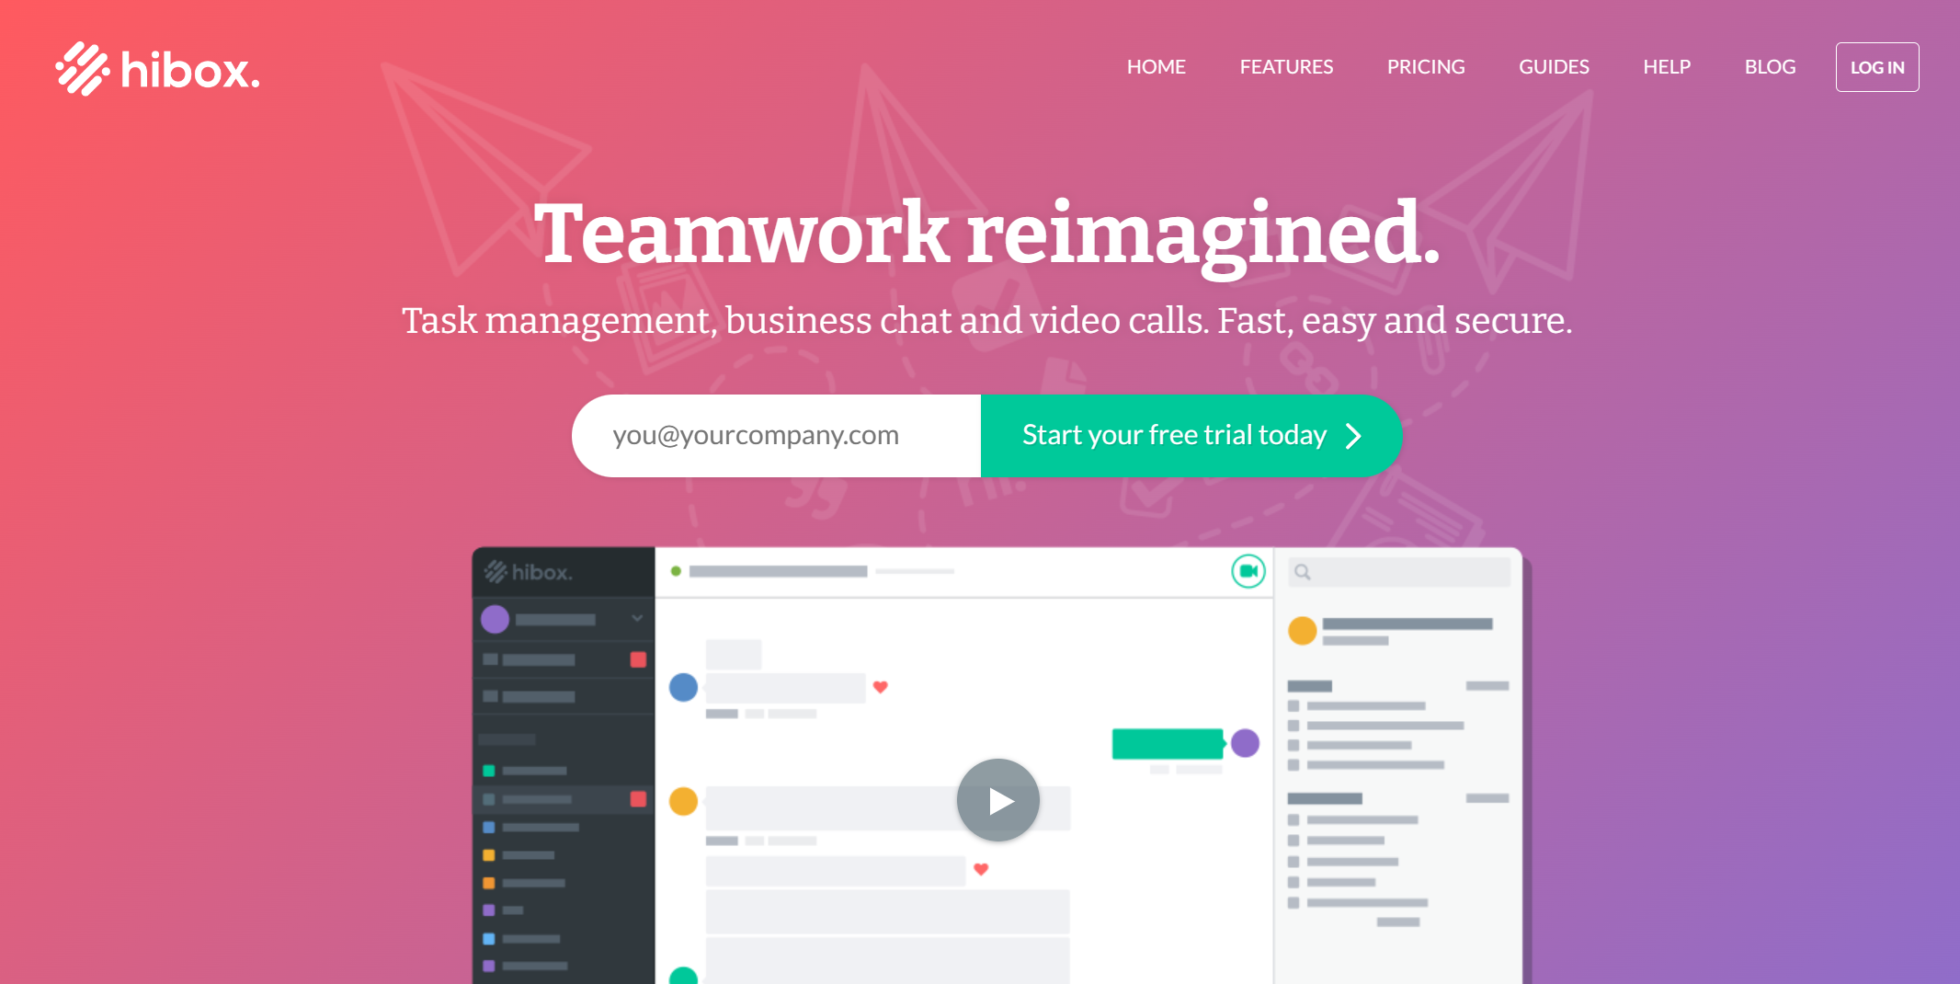 Hibox is a great free video calling website for reimagining teamwork.